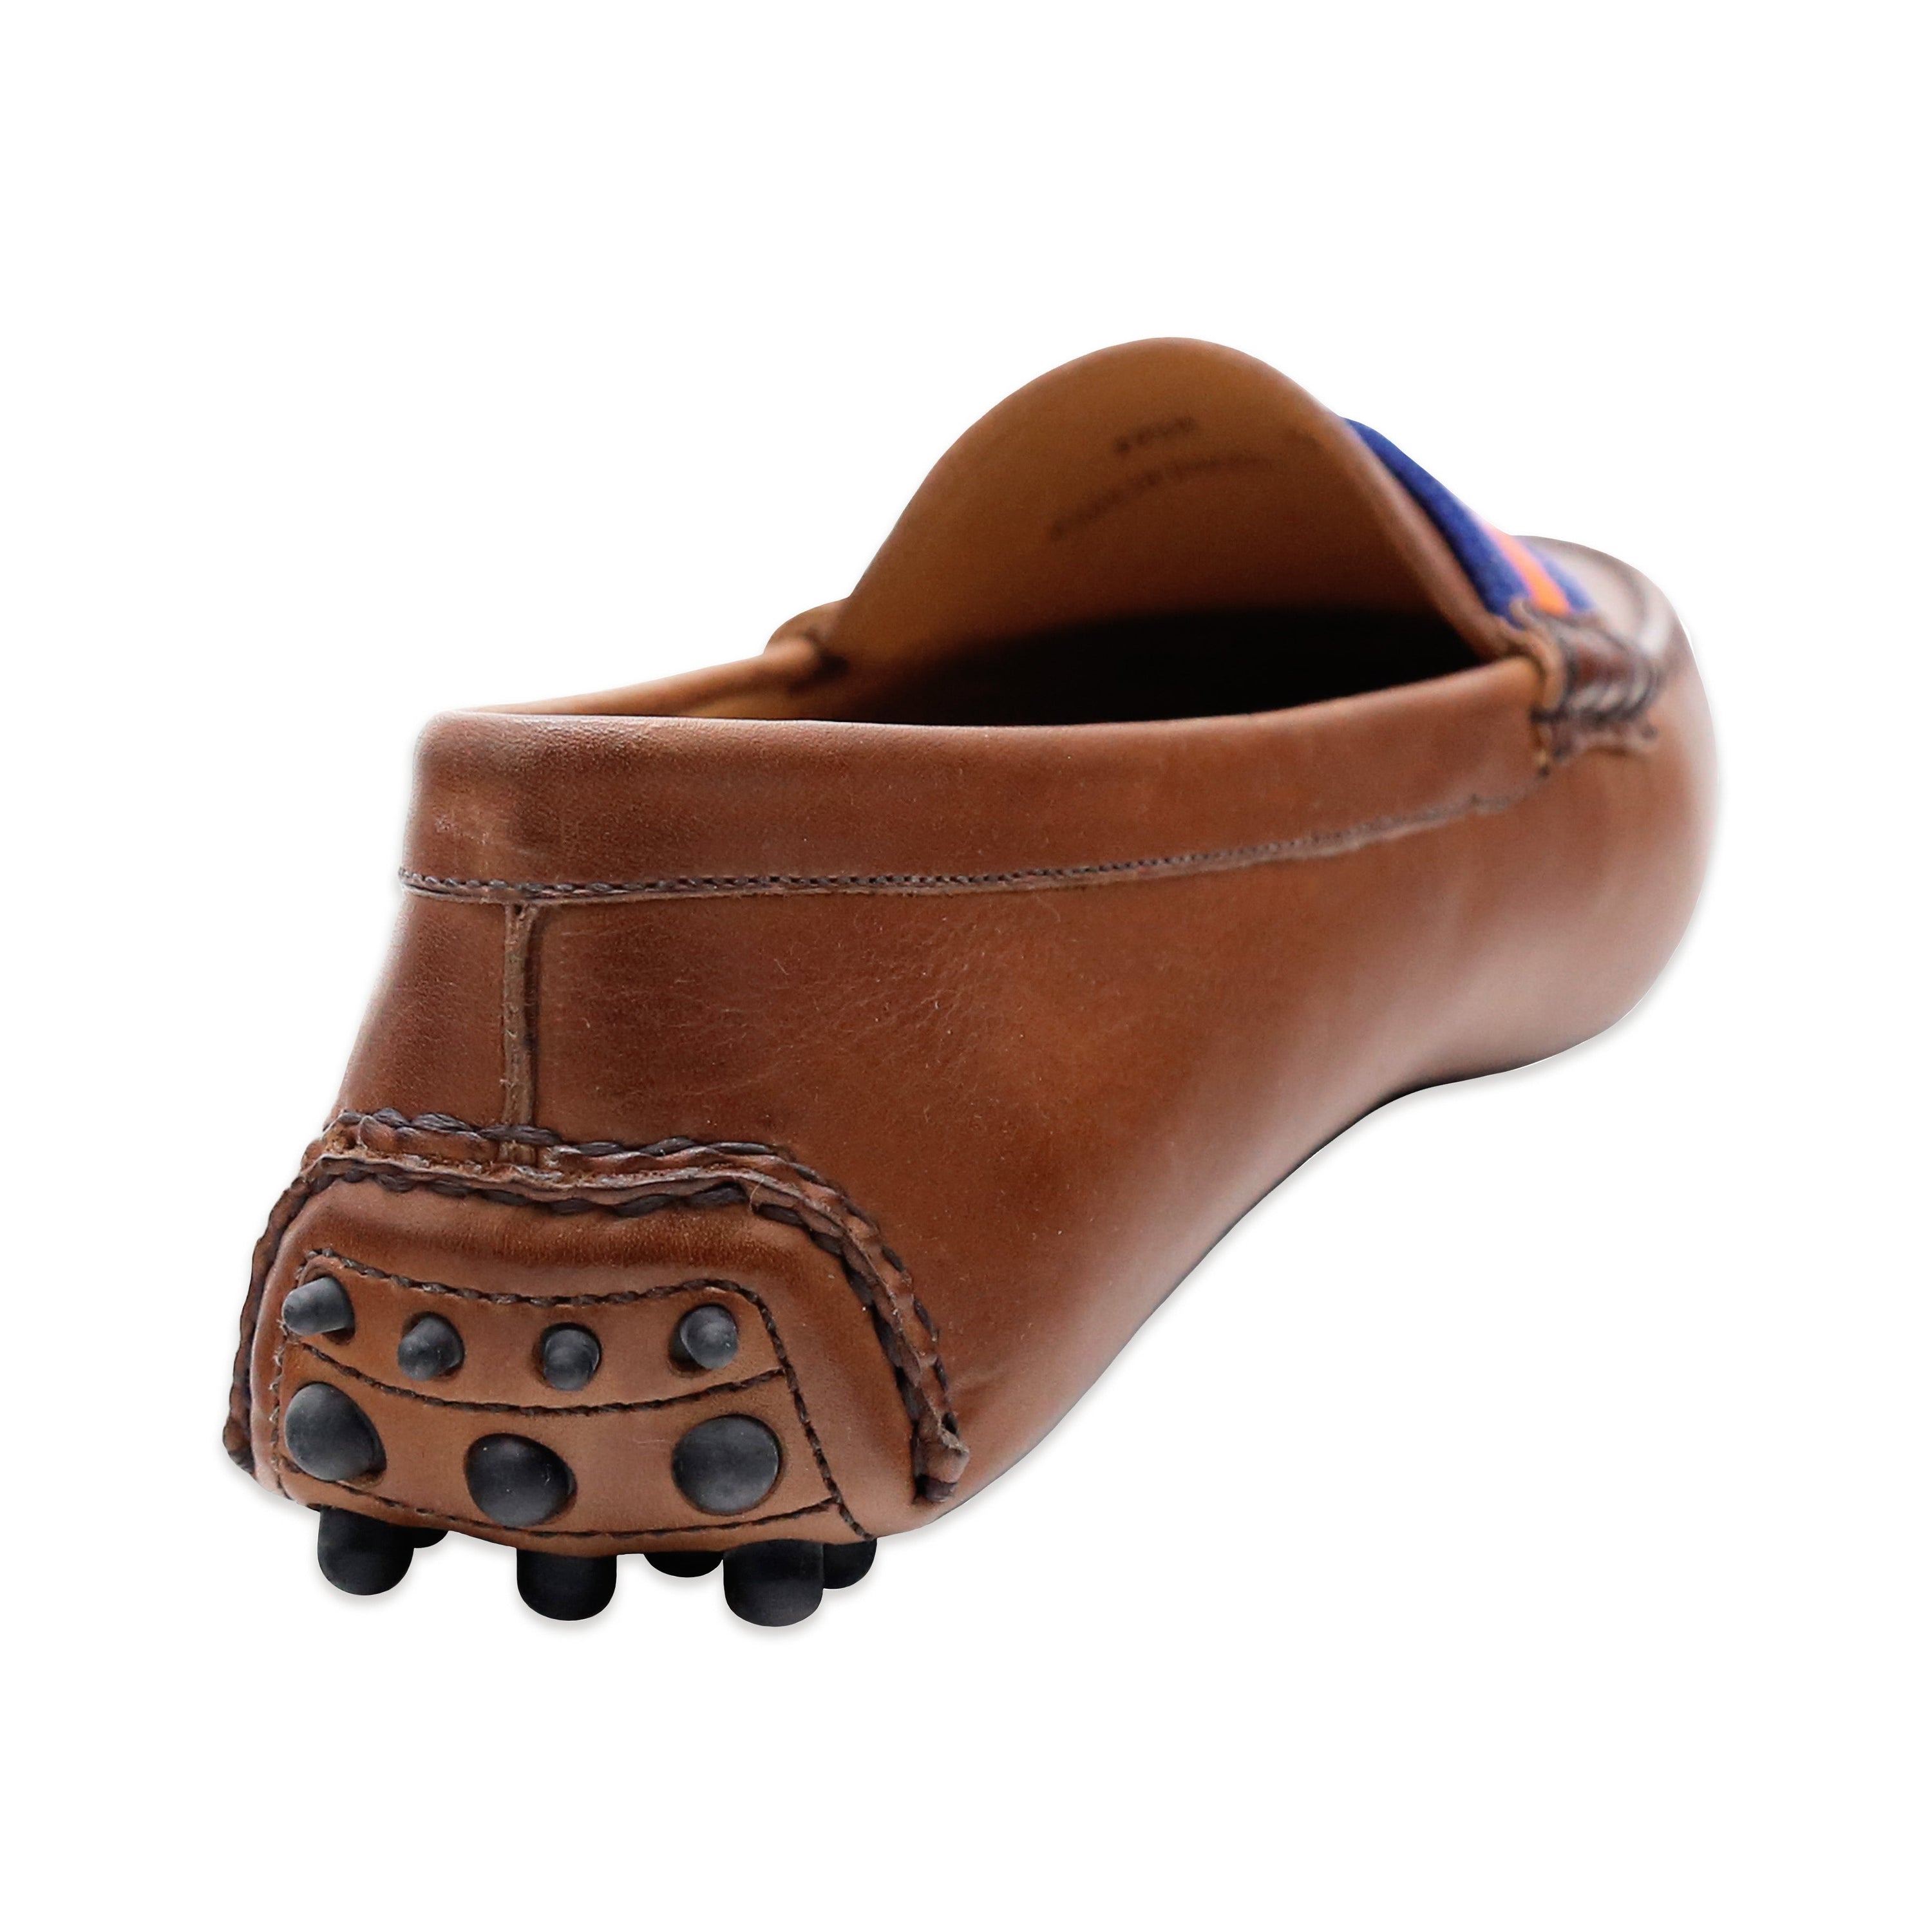 Kentucky Surcingle Driving (Blue-White) & – Leather-Logo) Smathers (Chestnut Shoes Branson